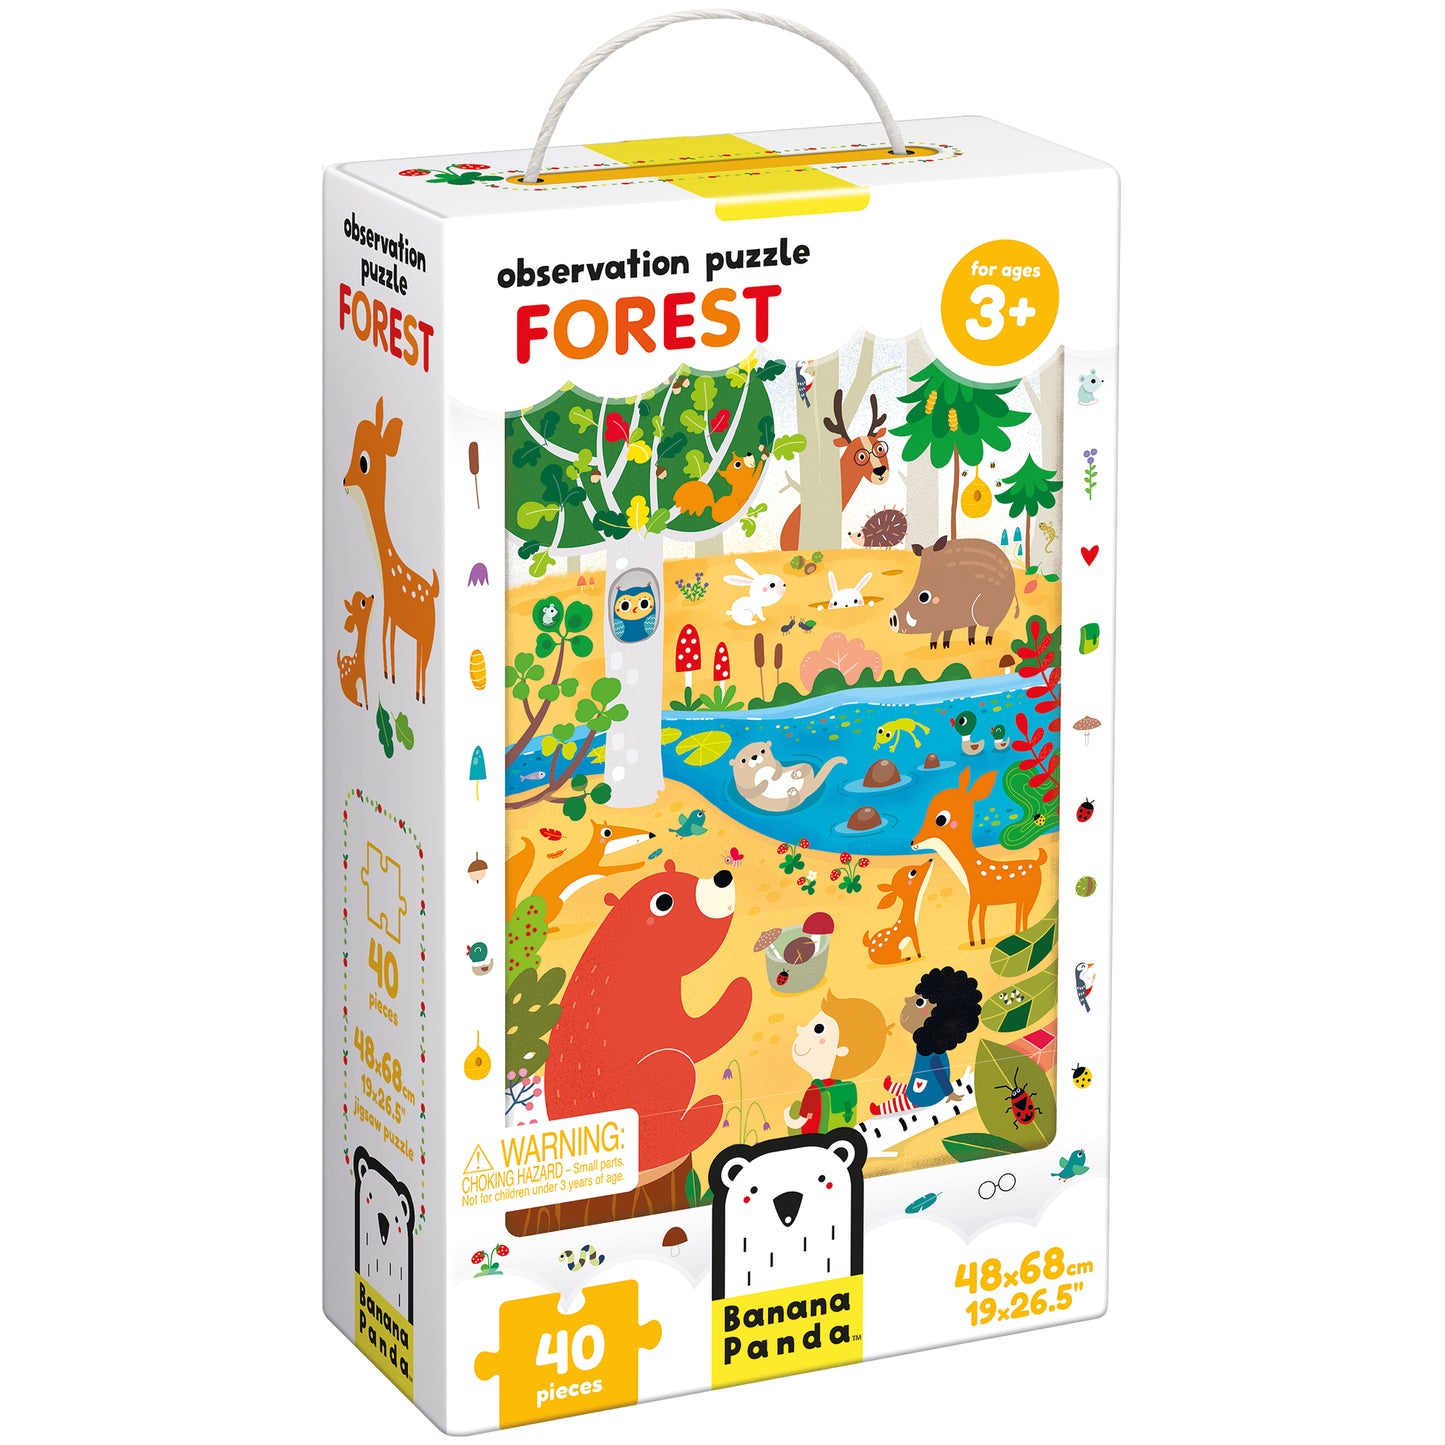 Observation Puzzle Forest